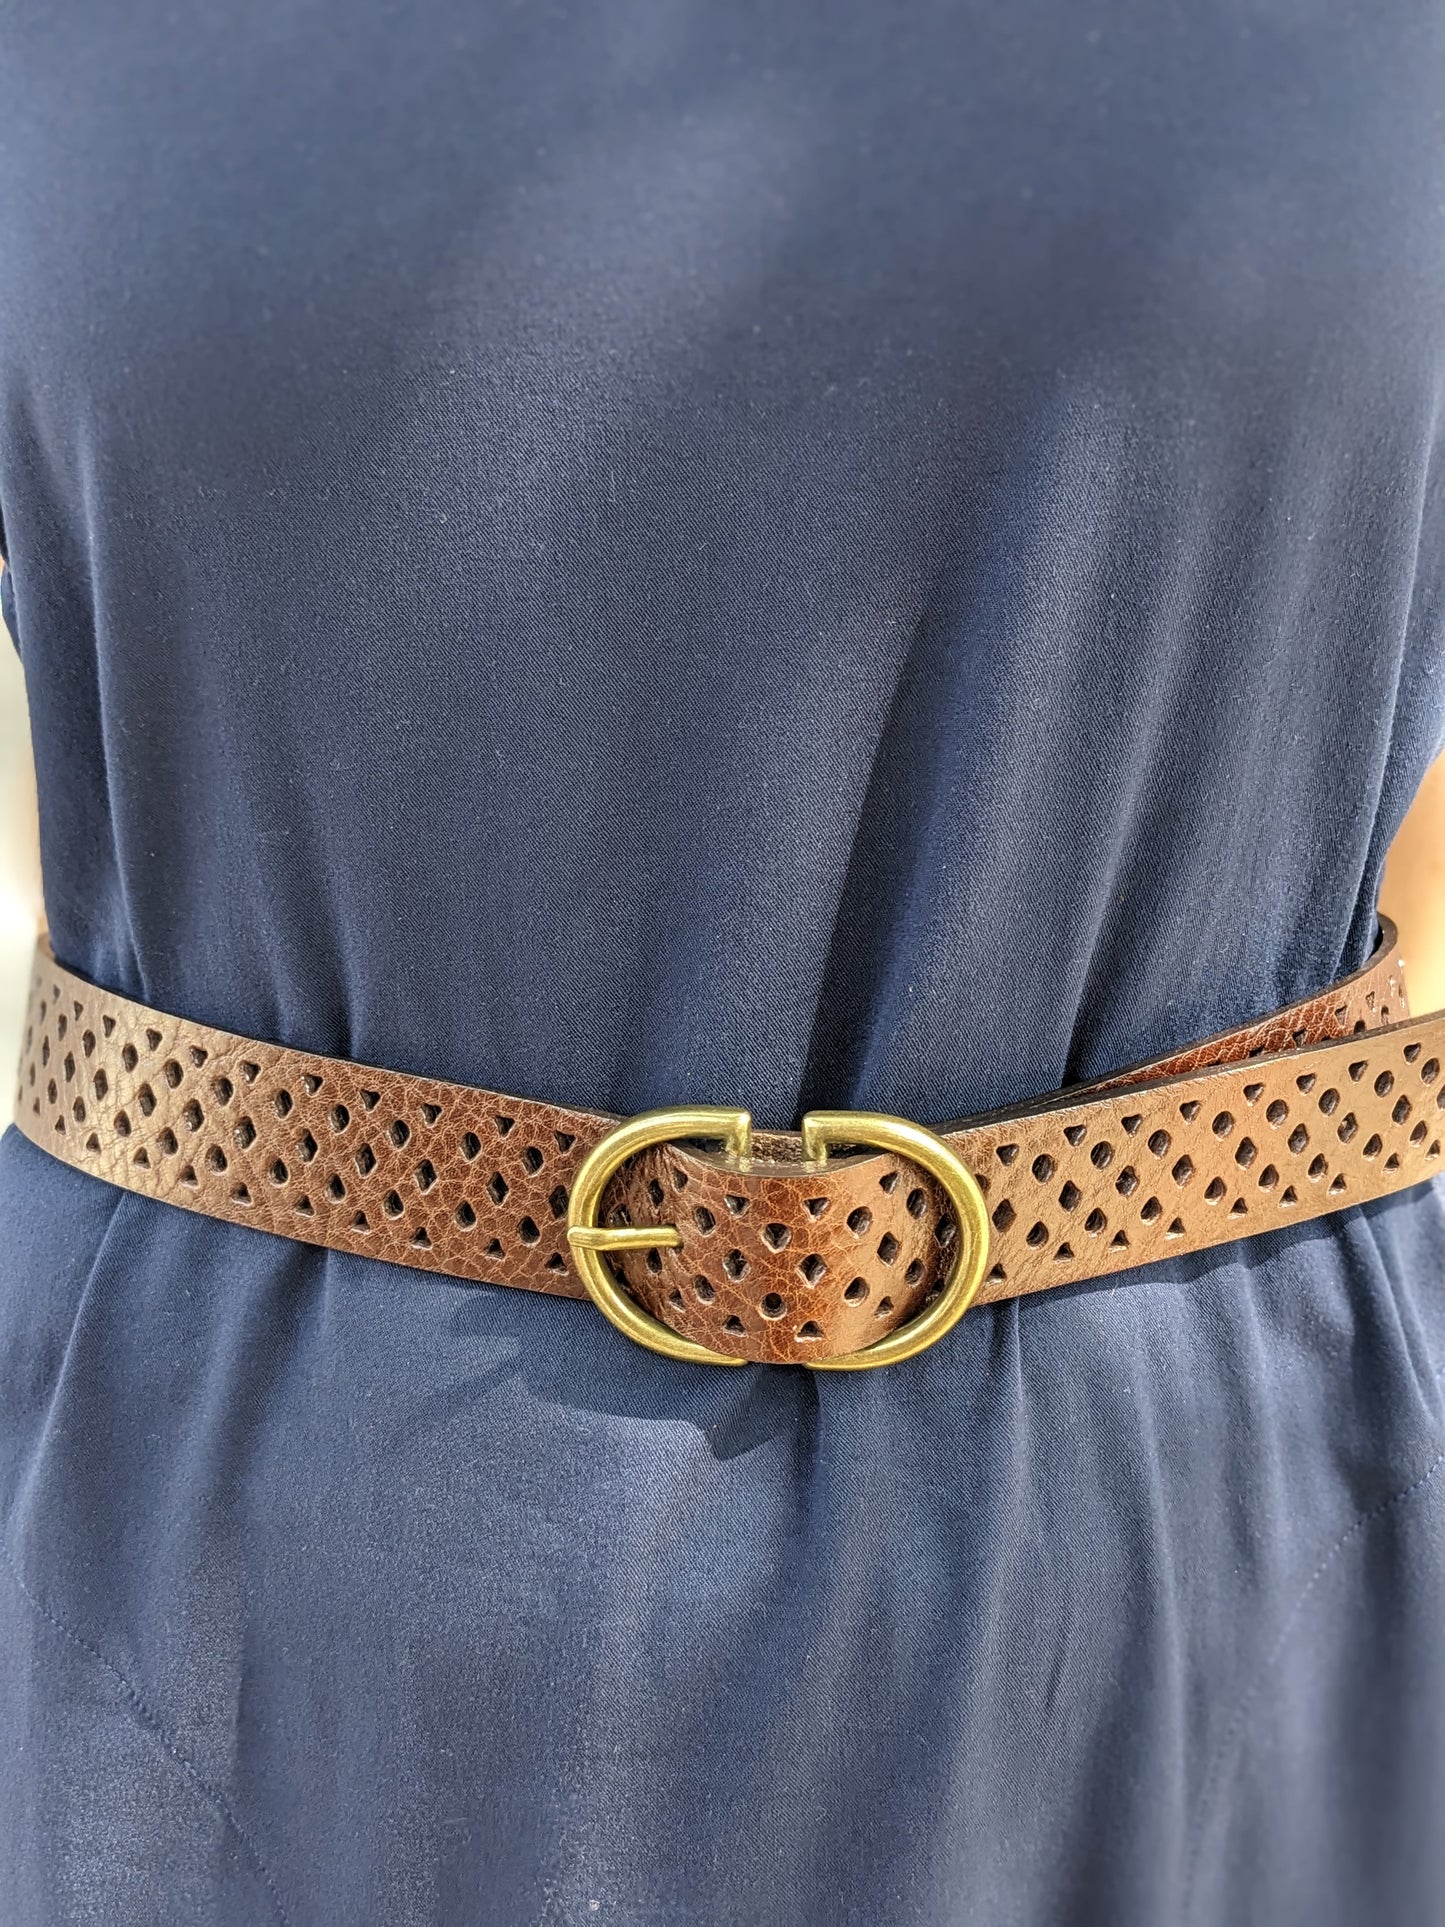 BROWN LEATHER CUT OUT BELT